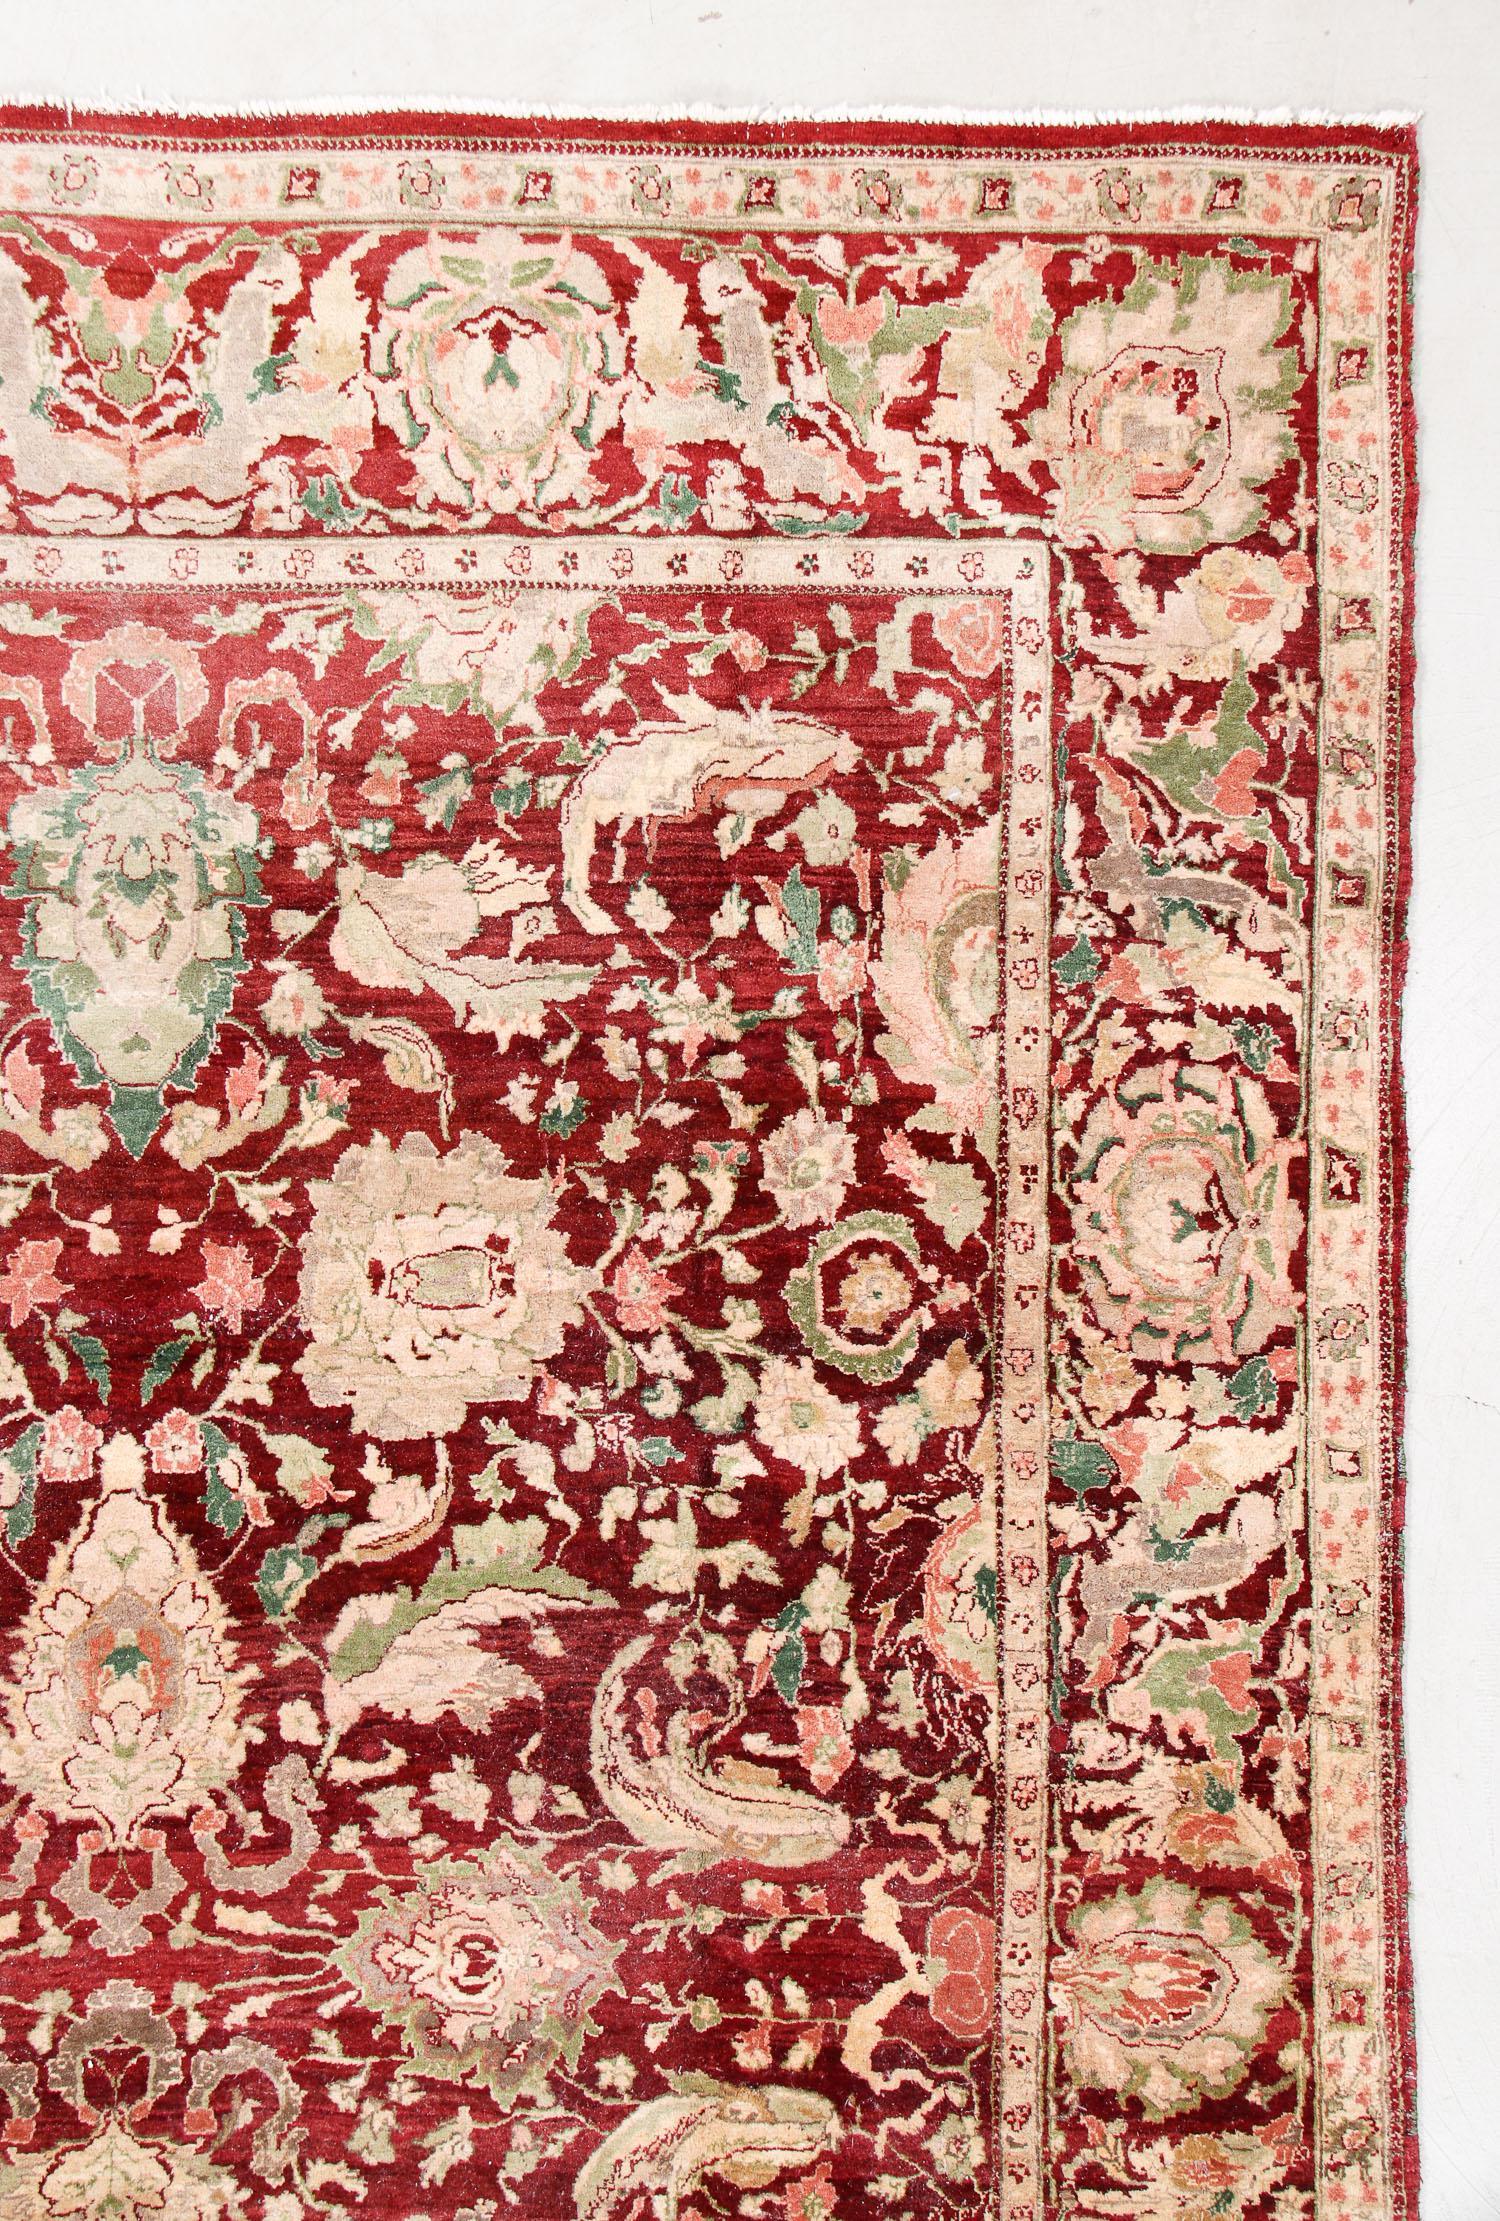 Burgundy red ground Agra carpets have historically been regarded among the most refined and elegant decorative carpets. They were commissioned by British nobility during the colonial period to adorn their castles and palaces. This example is